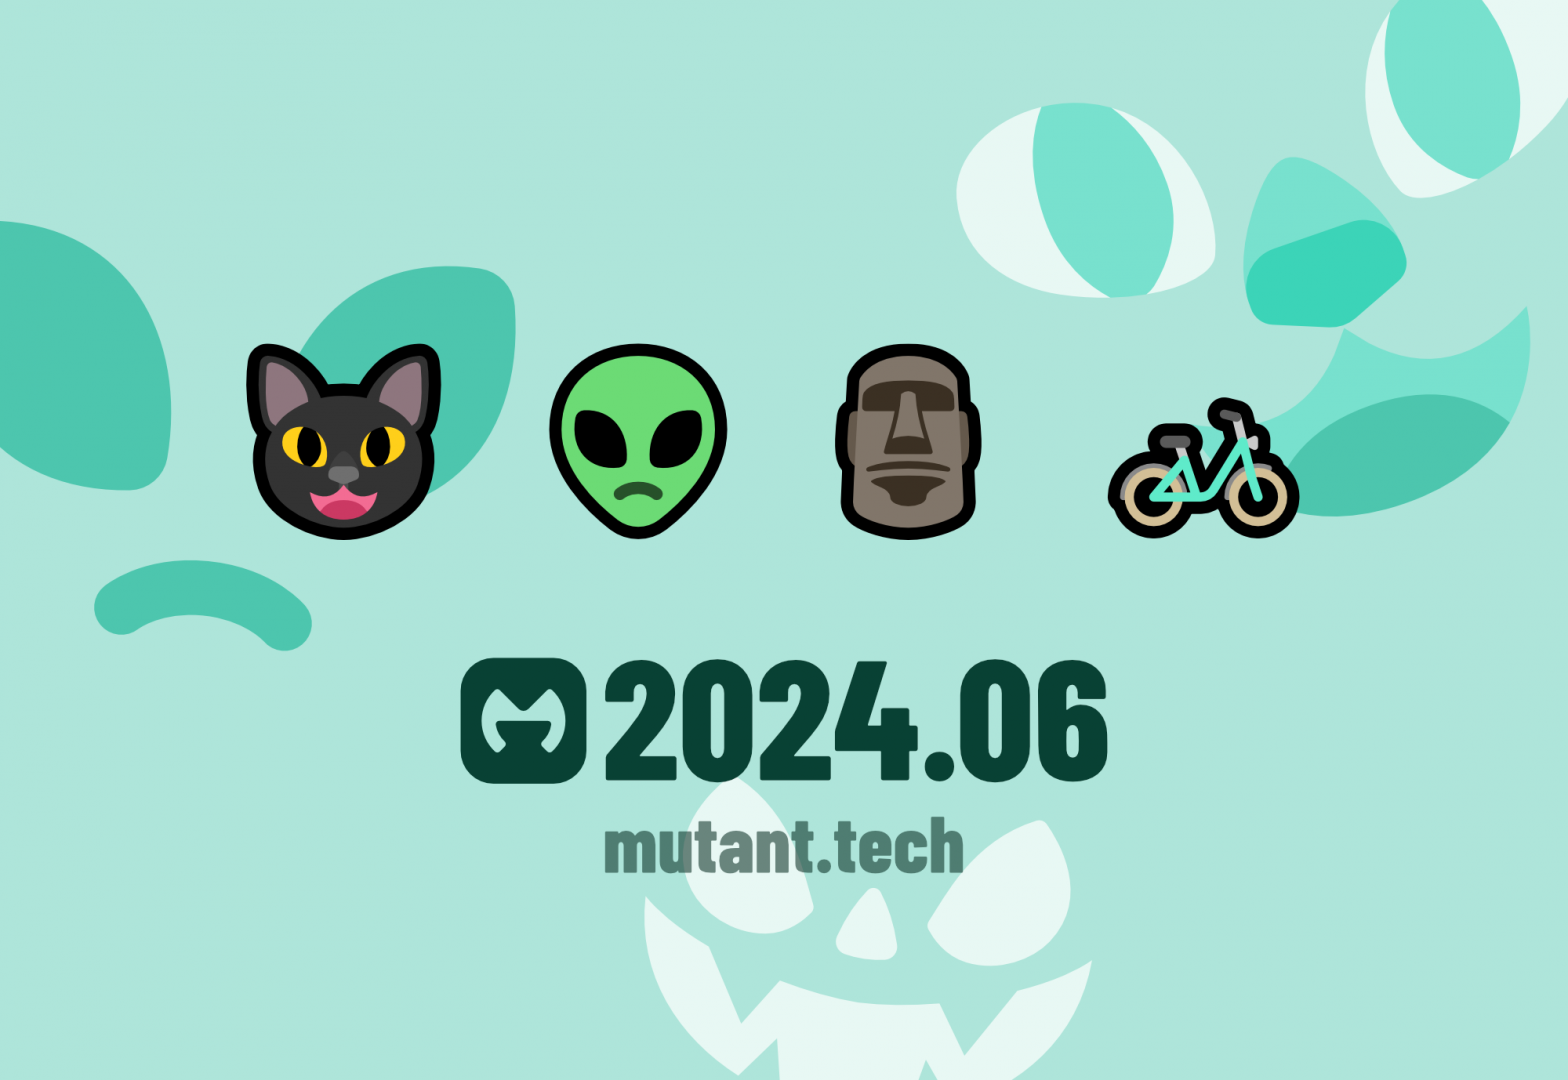 A mint green background featuring four icons in the center: a black cat with a pink tongue, a green alien, a moai statue, and a bicycle. Below these icons, the text reads "2024.06 mutant.tech". There are 3 faces in the background of the graphic in faded teal colours - a smiling cat face, a frowning alien face, and a jack-o'-lantern face.